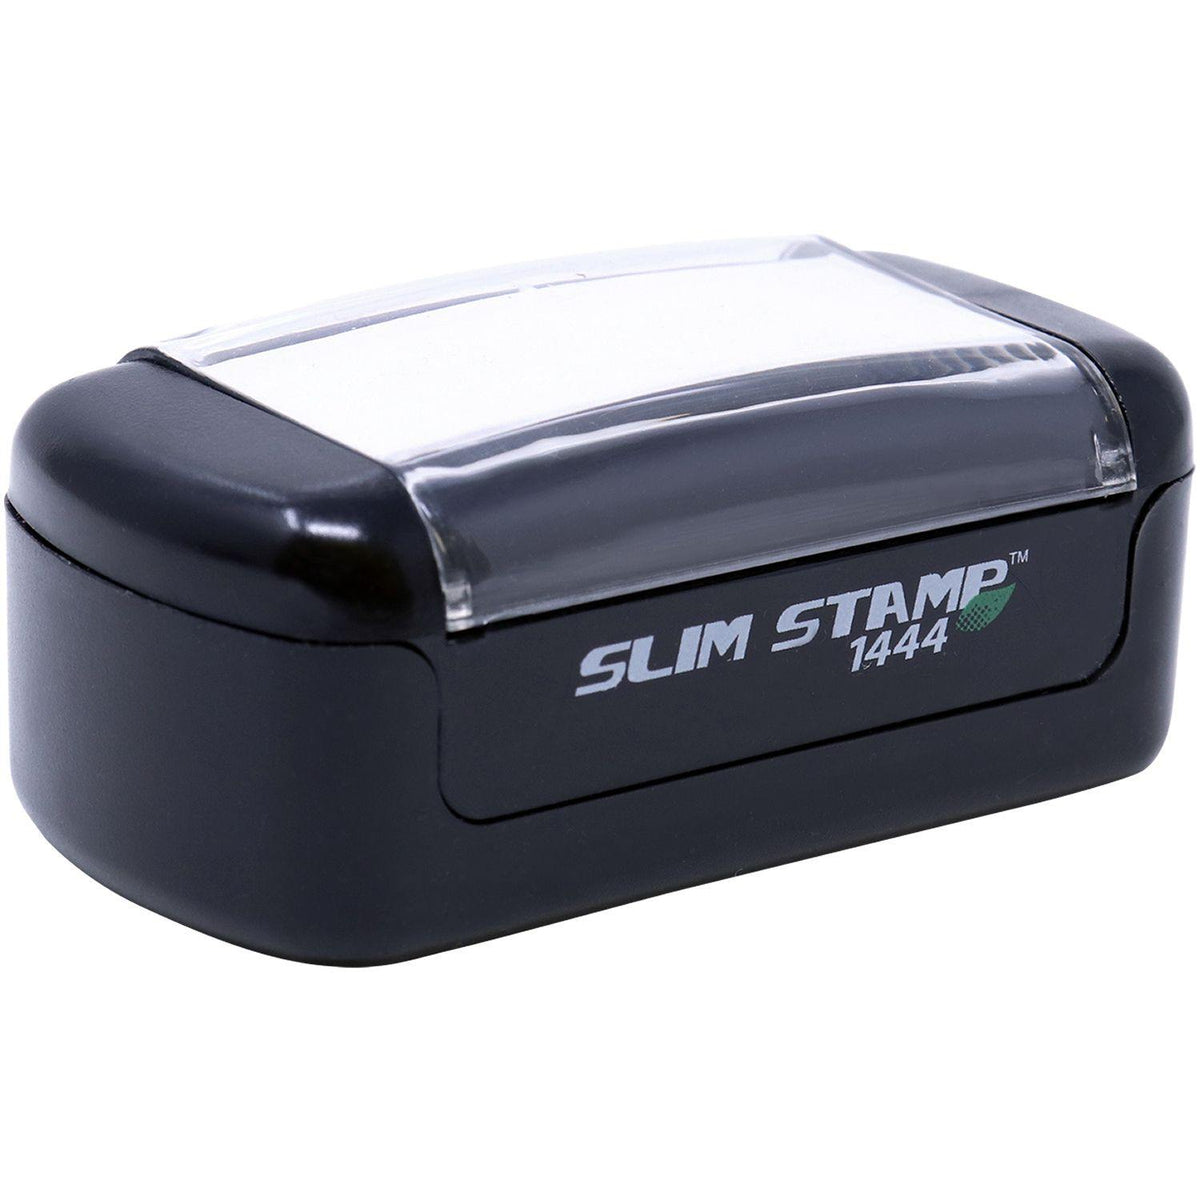 Alt View of Slim Pre-Inked Covid-19 Tested Stamp Mount Angle